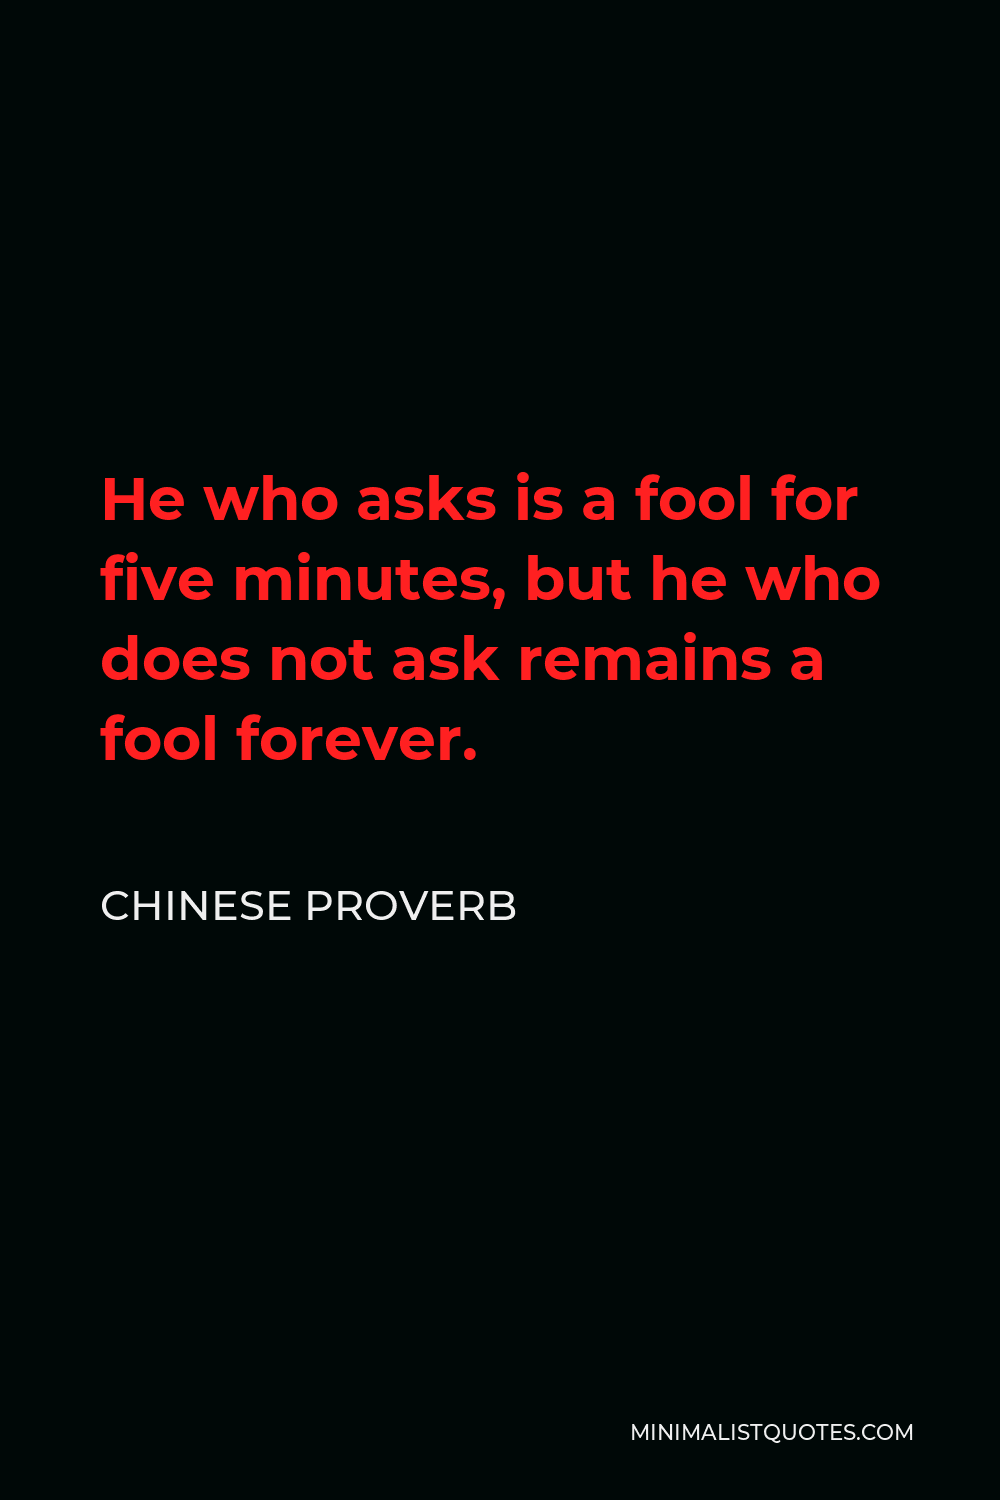 Chinese Proverb Quote - He who asks is a fool for five minutes, but he who does not ask remains a fool forever.